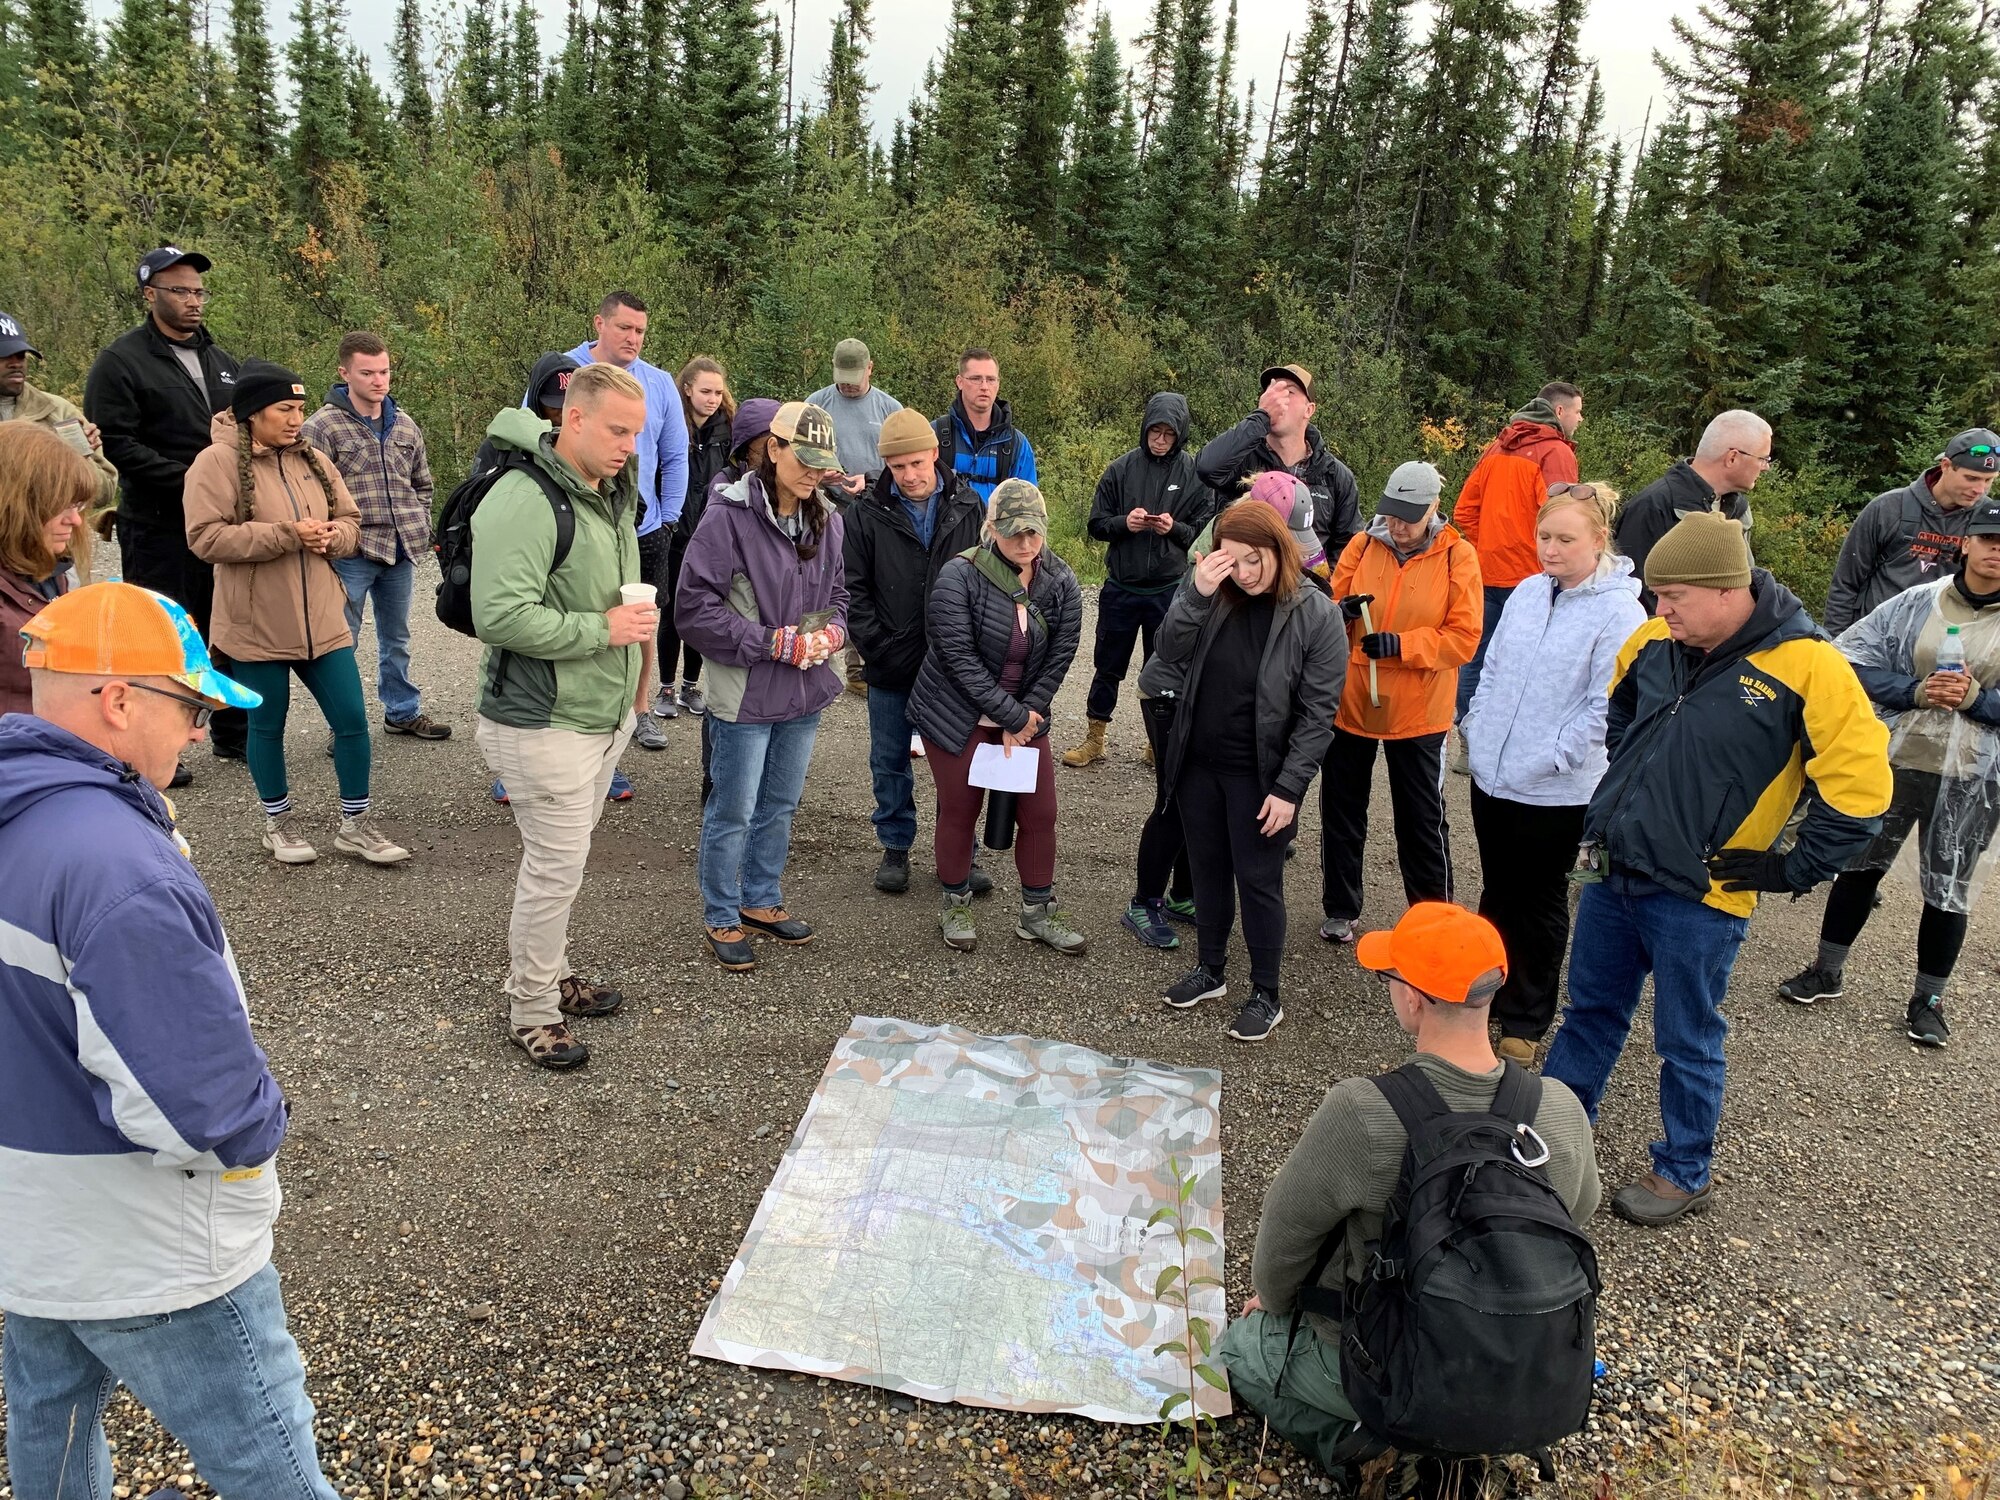 Members of the Tennessee Air National Guard from a variety of career fields participated in land navigation and survival skill training in the more rural parts of Eielson Air Force Base, Alaska, Aug. 19, 2021. Survival skills learned included fire production, emergency rations, map reading, signaling for help, and procuring shelter.